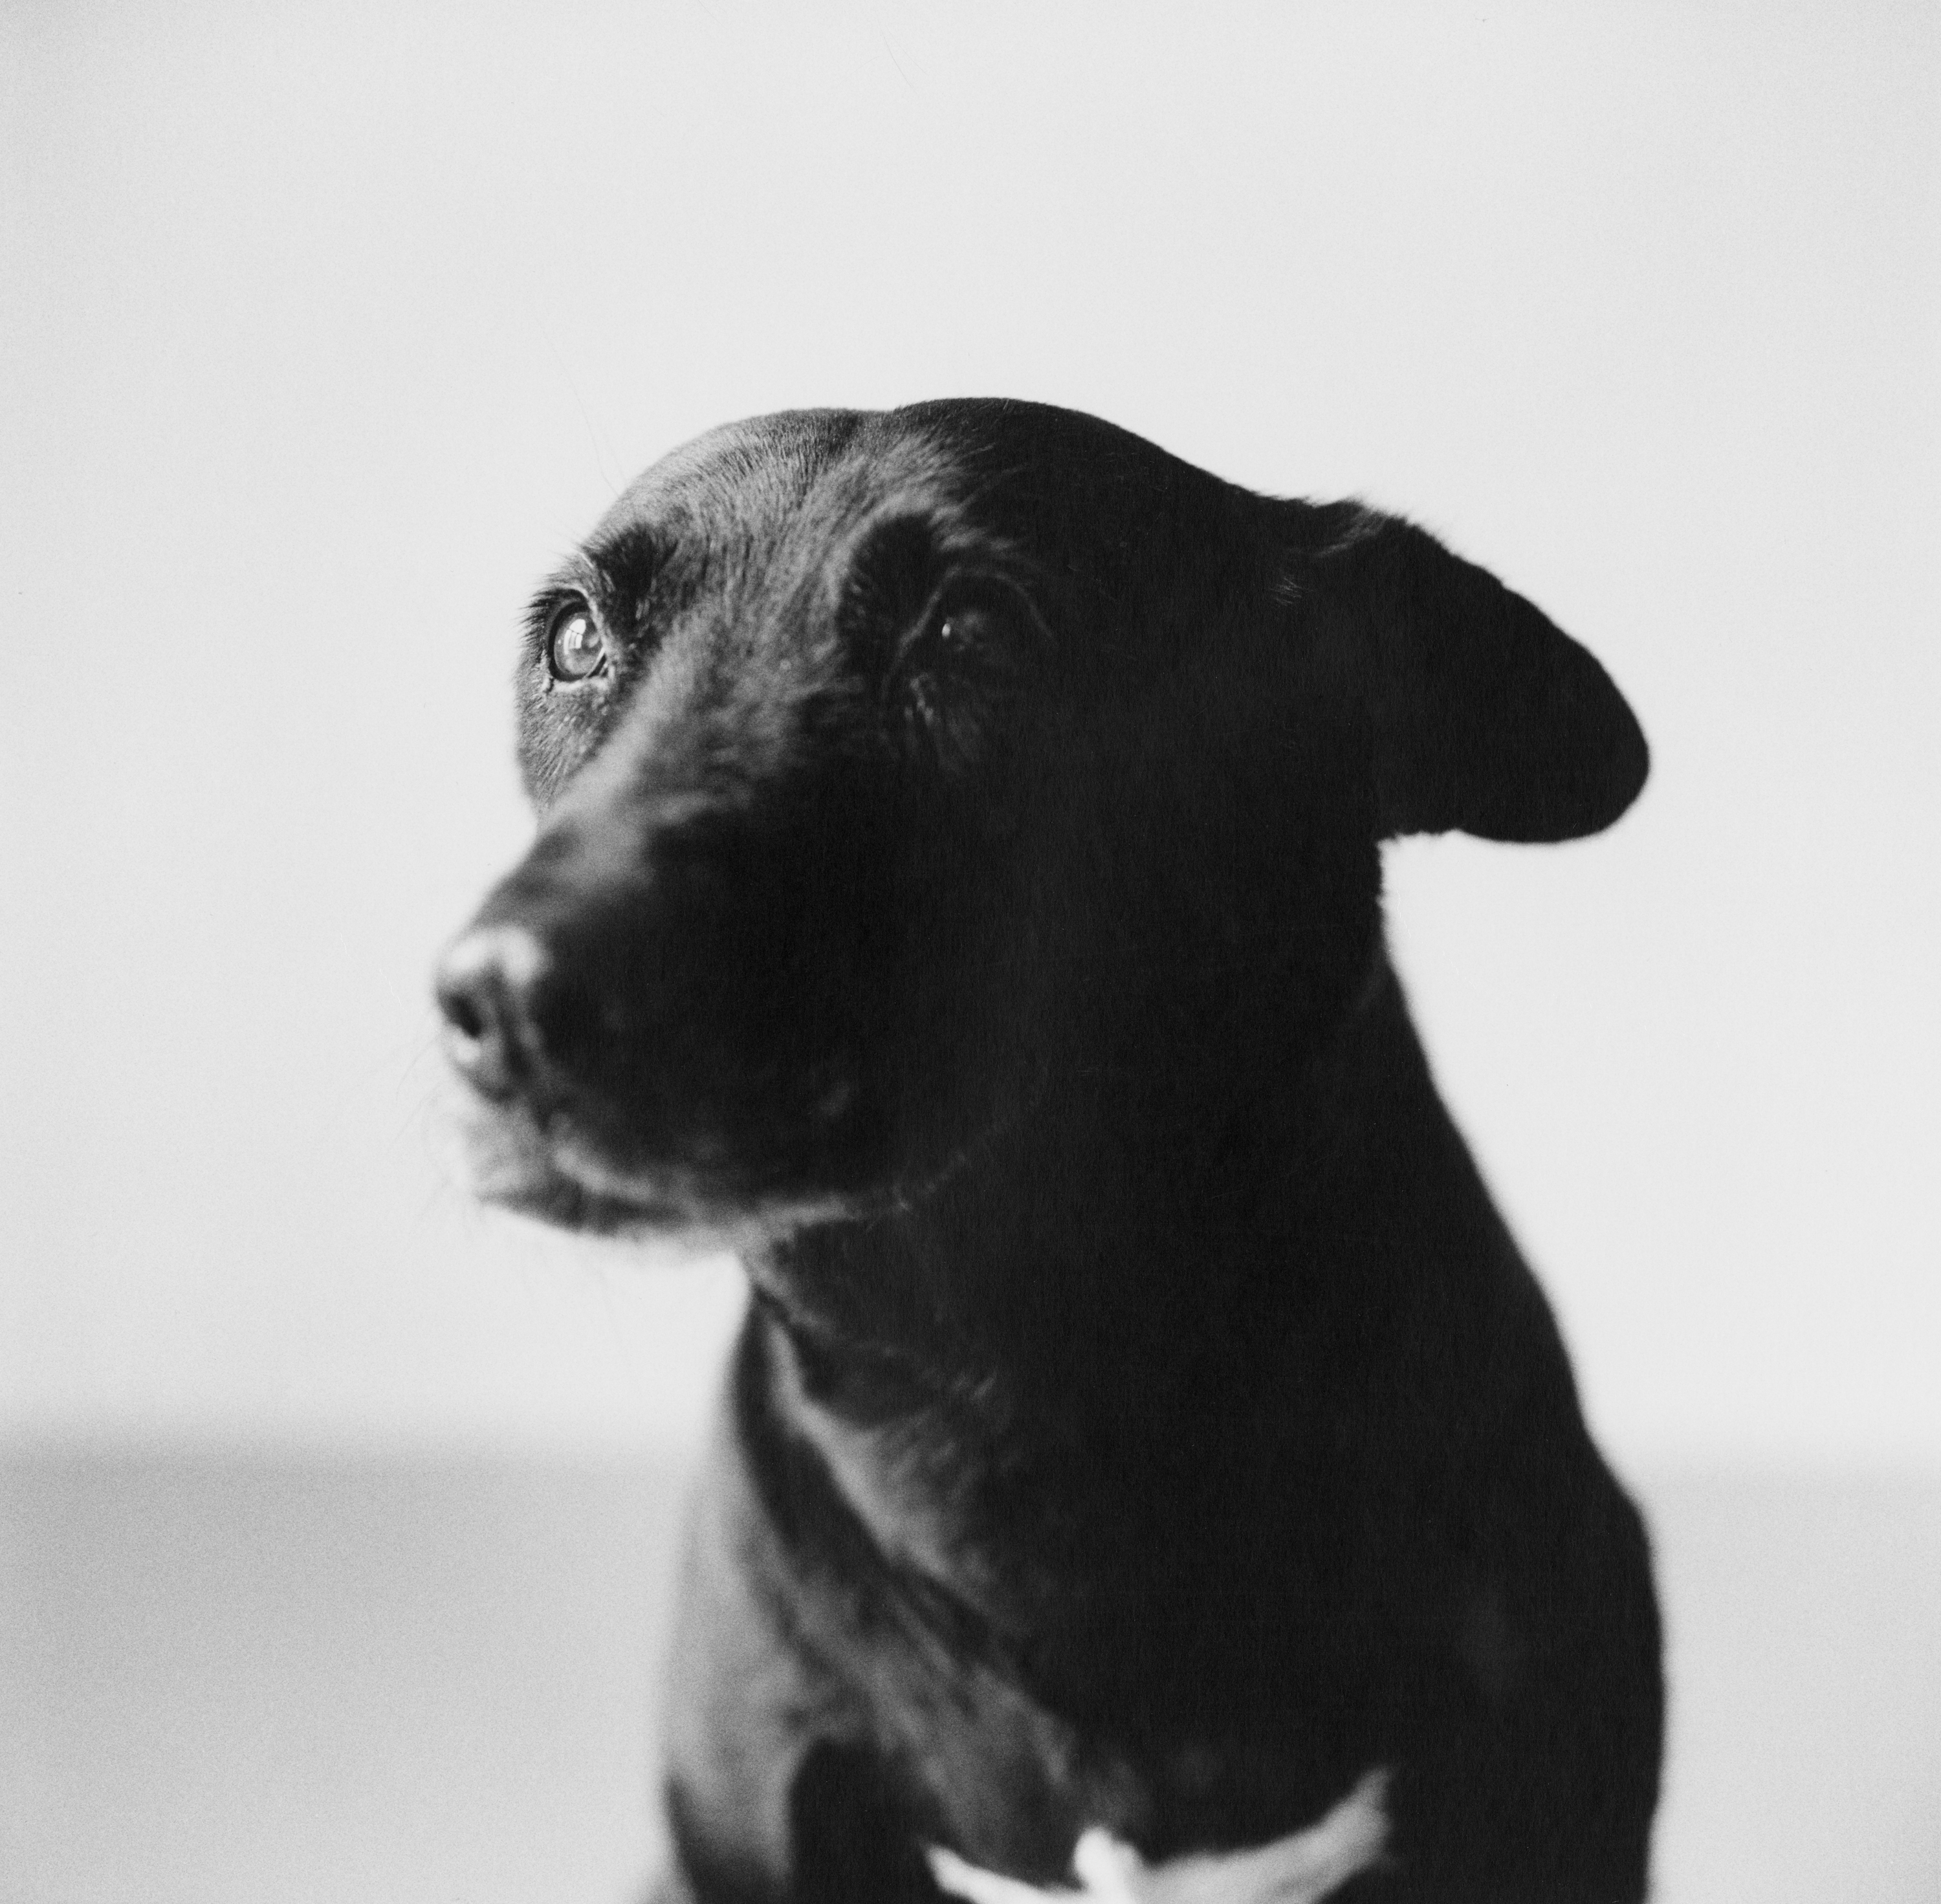 Black and white photograph of a dog up close in a studio